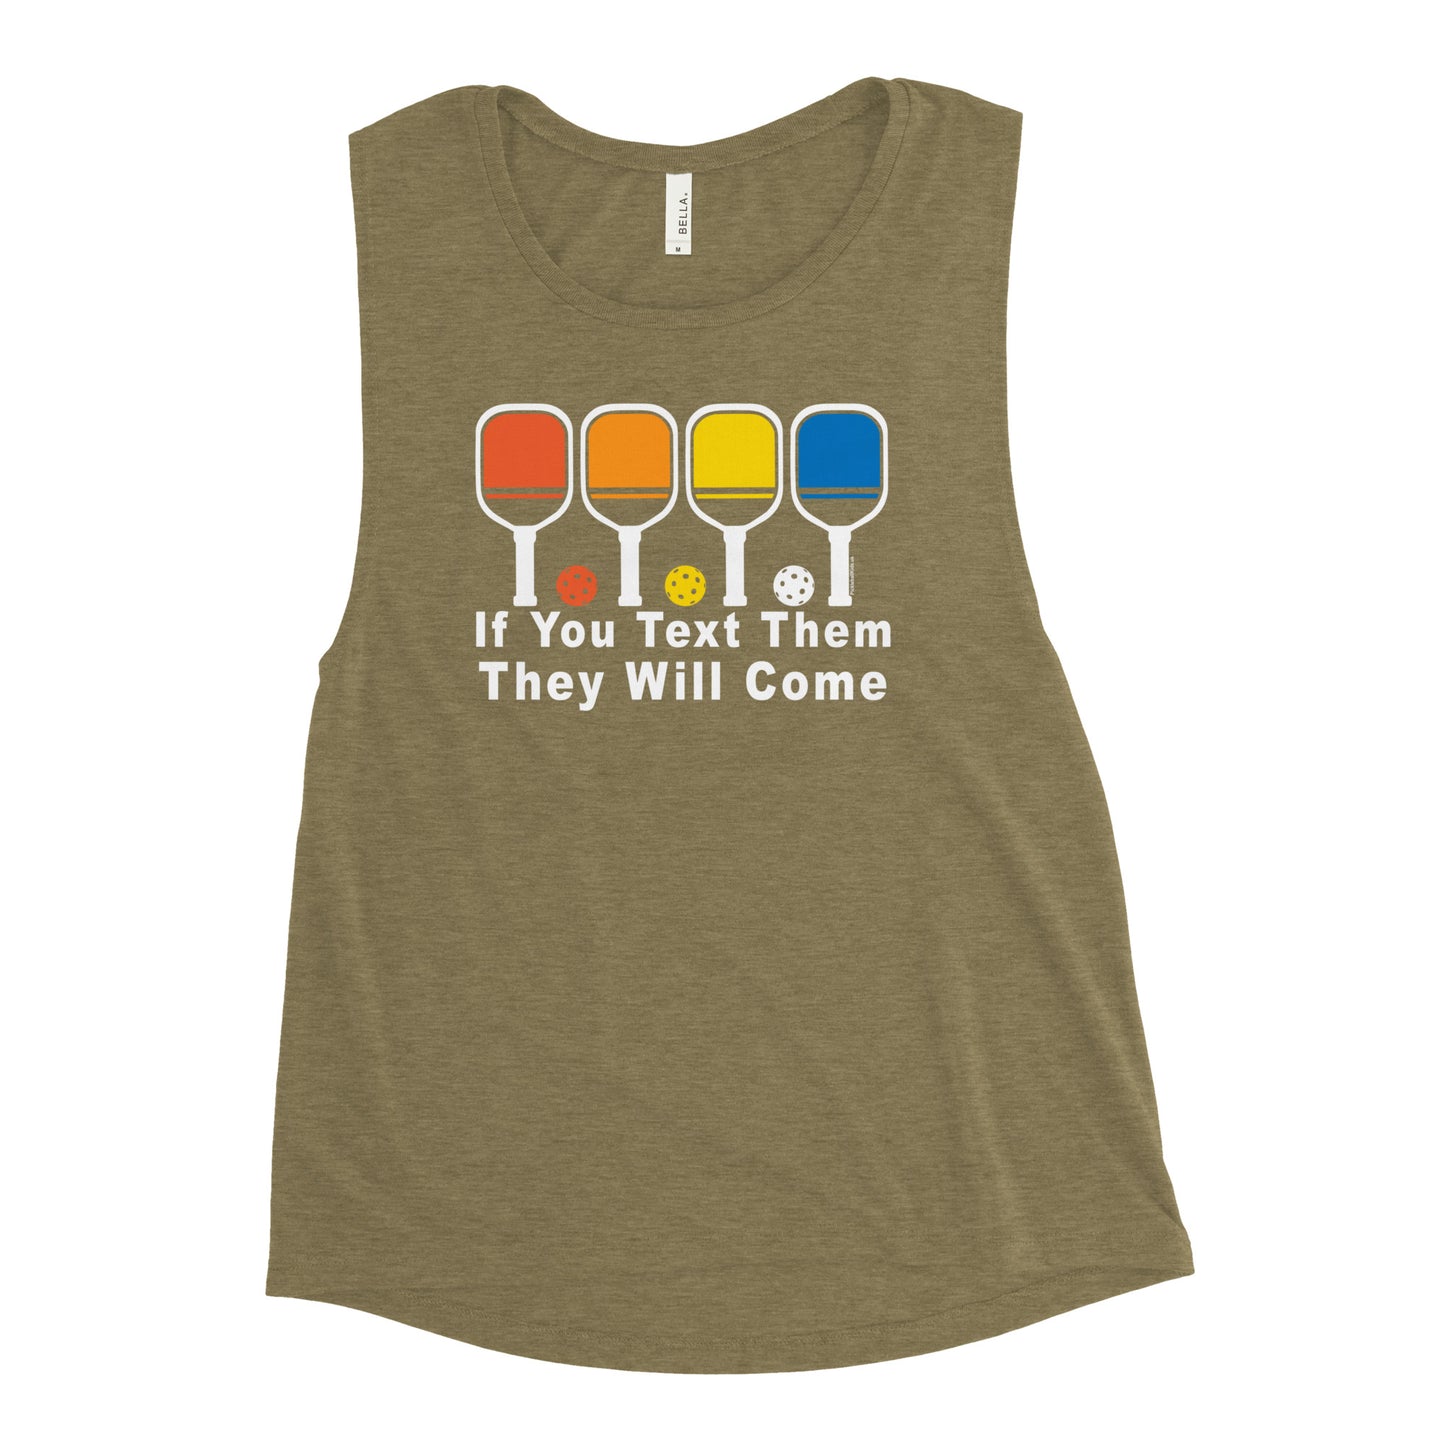 Ladies’  Pickleball Muscle Tank, "If You Text Them They Will Come."